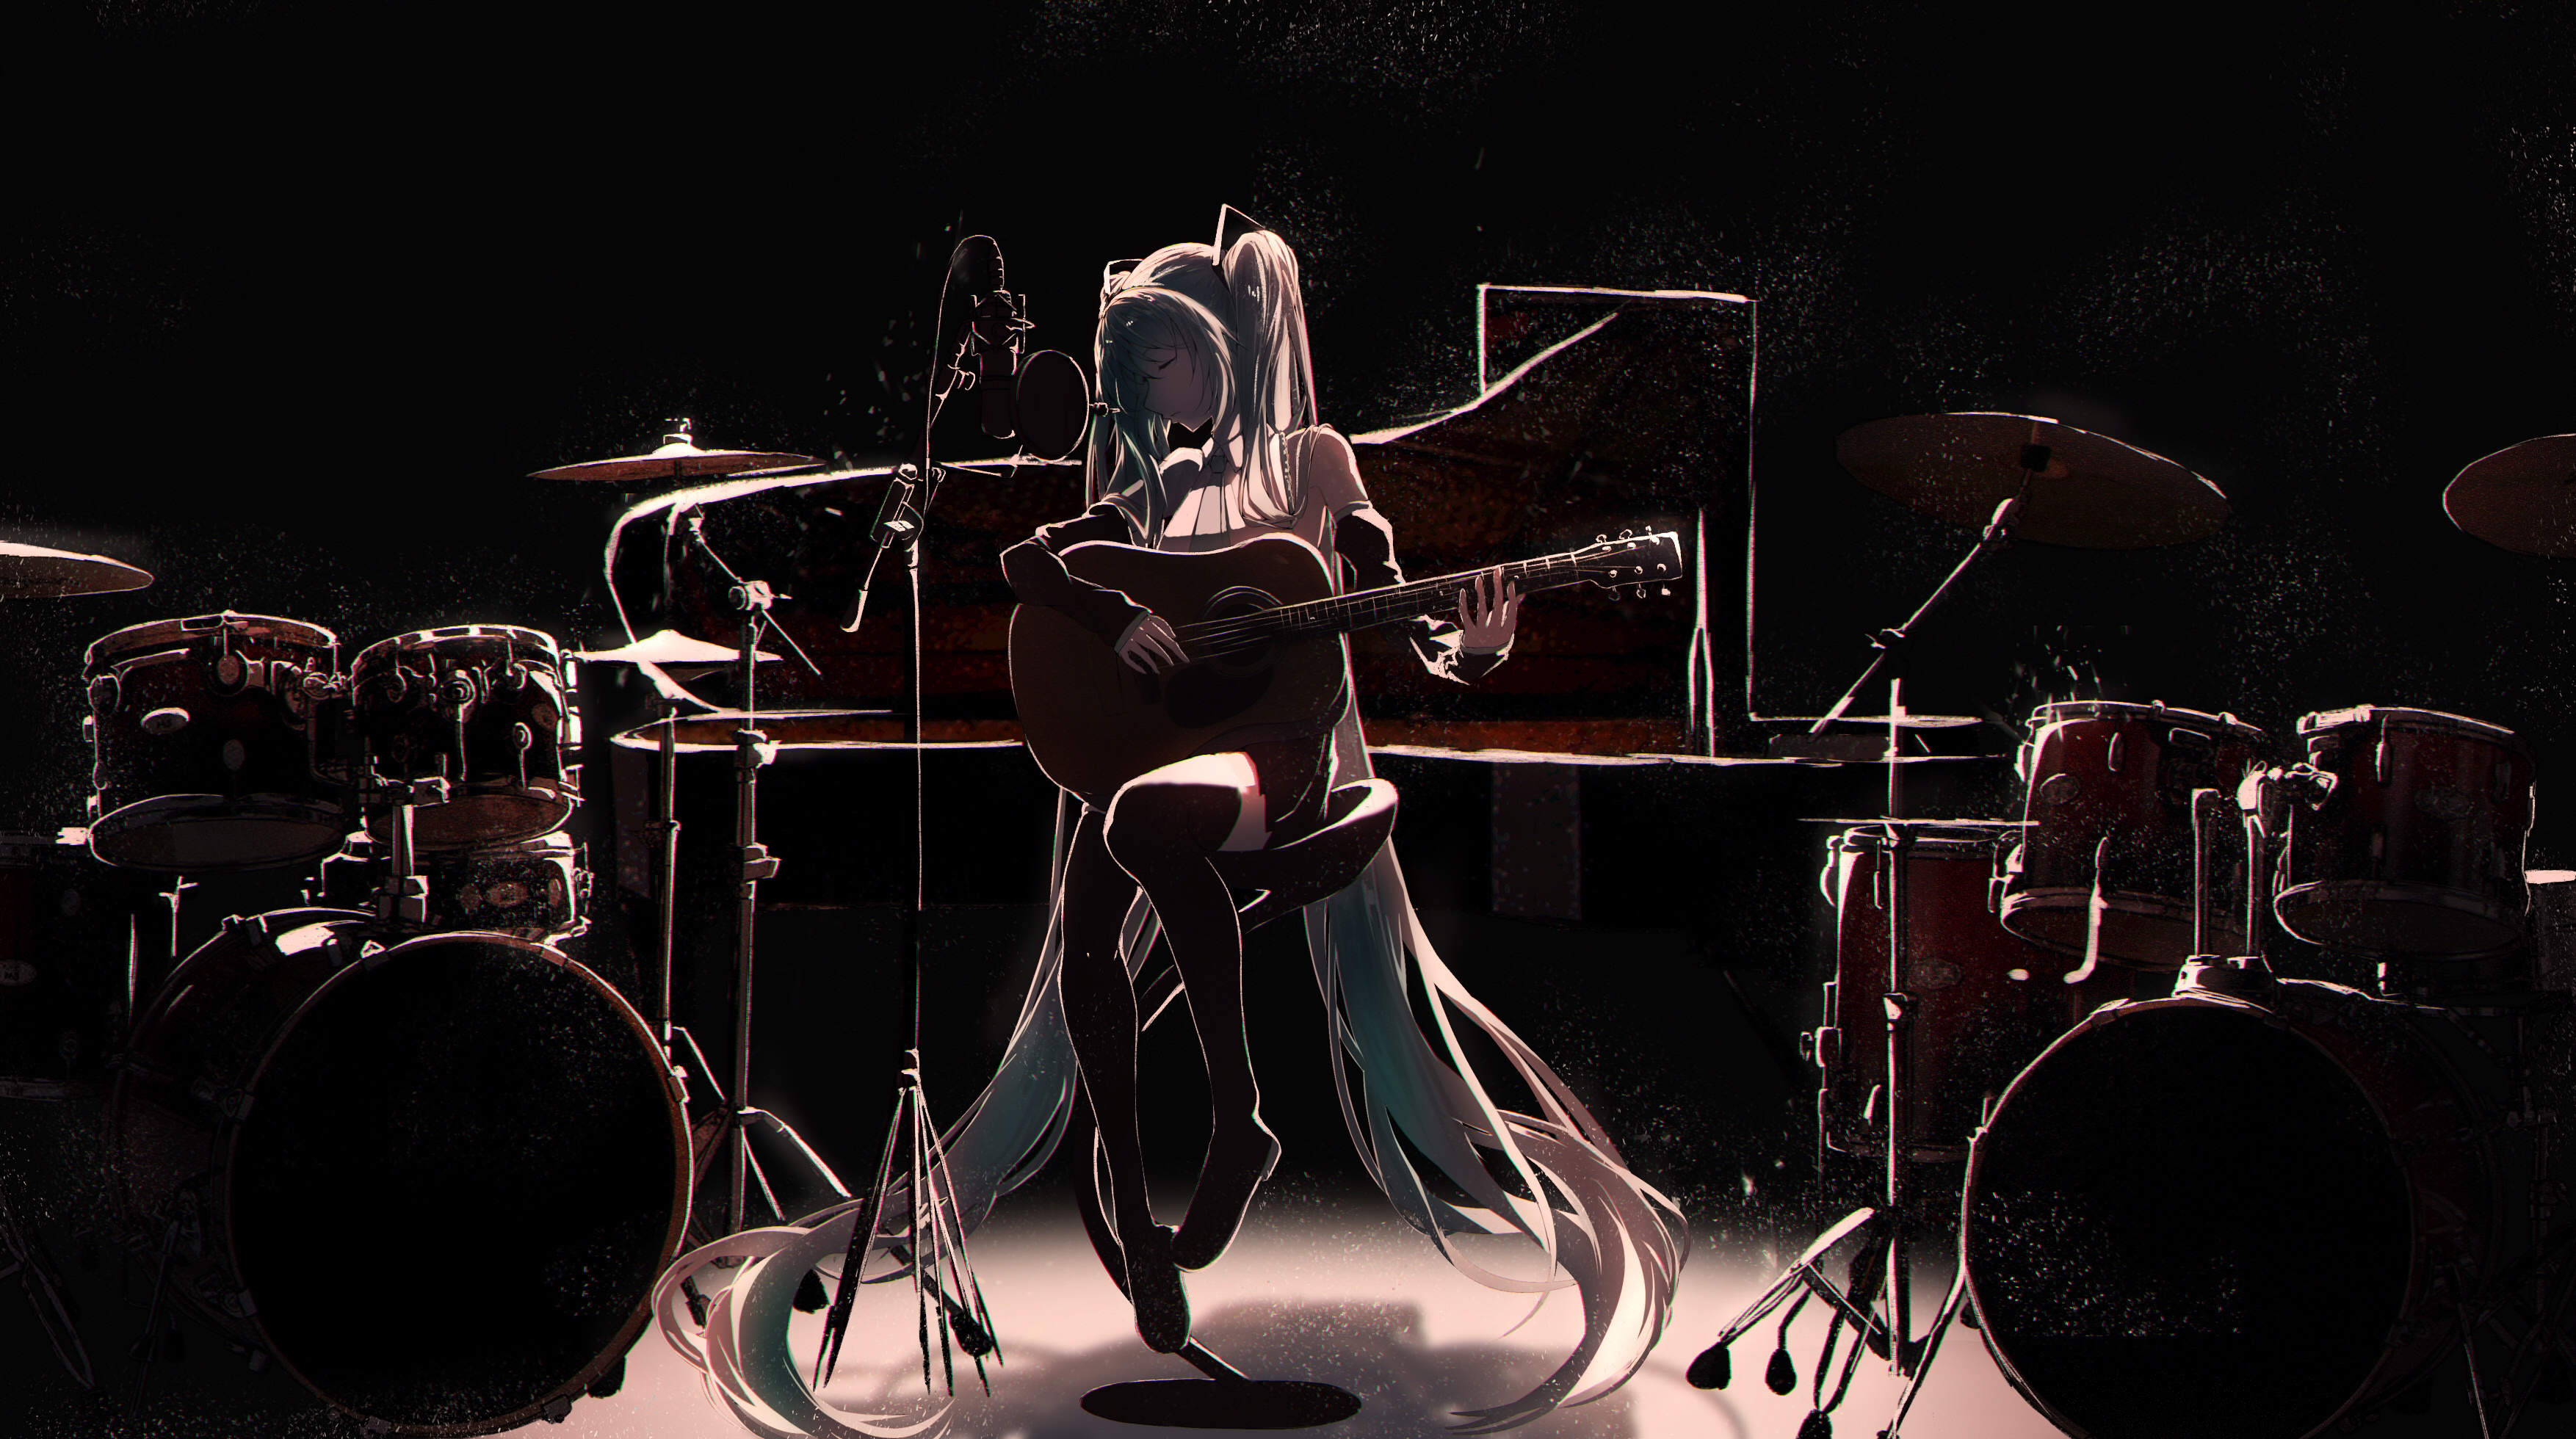 Anime 3508x1960 anime Pixiv Hatsune Miku Vocaloid drums guitar musical instrument long hair twintails closed eyes microphone blue eyes sitting chair anime girls